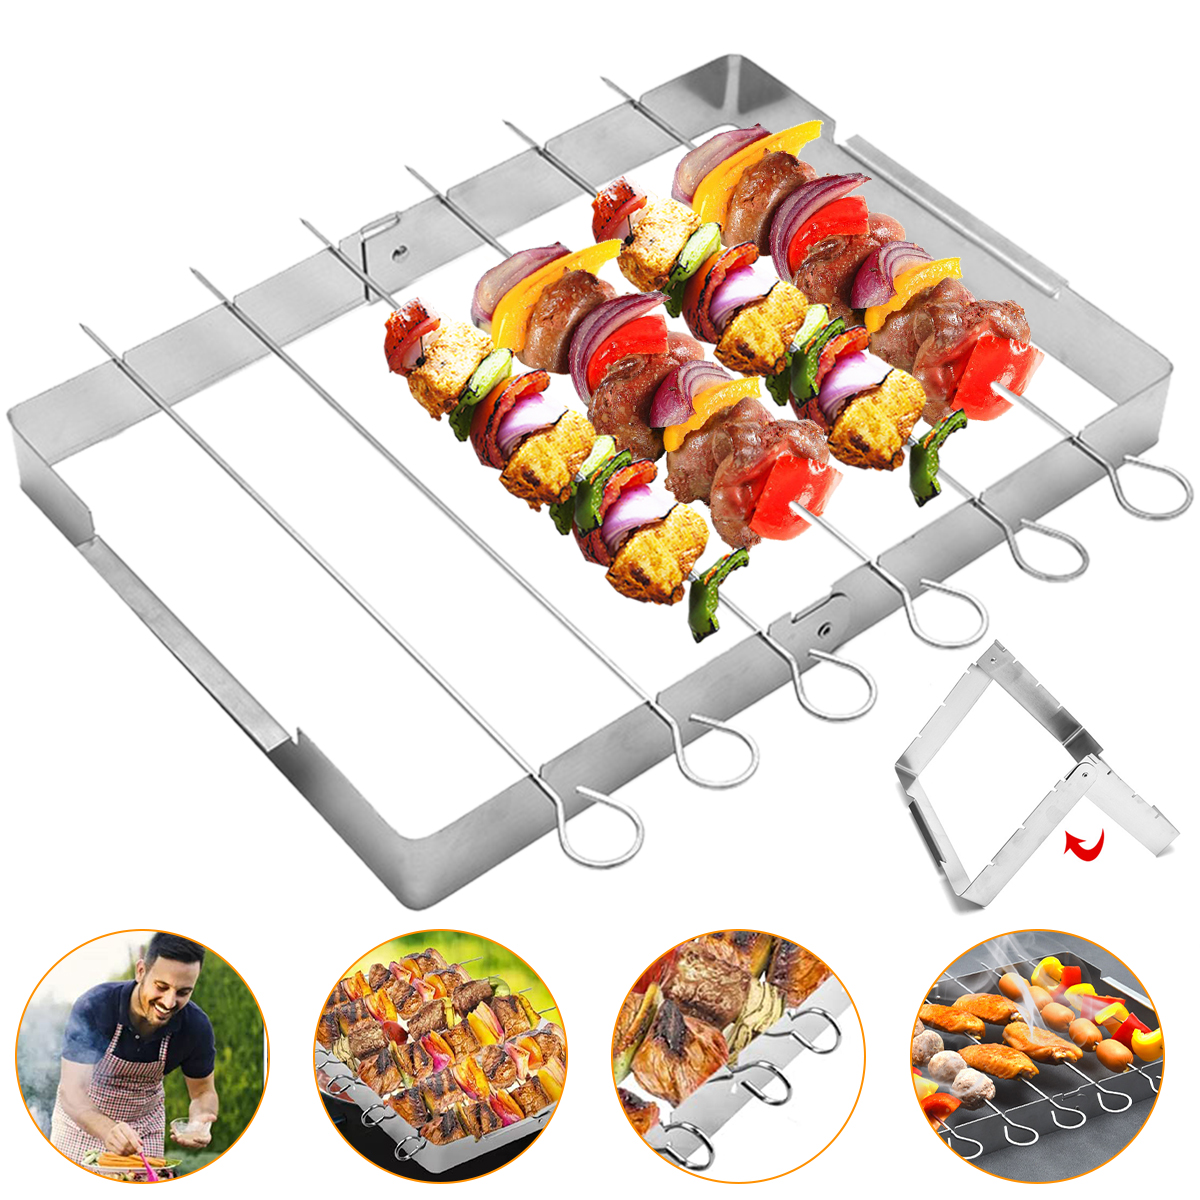 Barbecue Skewer Shish Kabob Set，Foldable Stainless Steel Grill Rack Set with 6 pcs Skewers for Party and Home - image 2 of 8